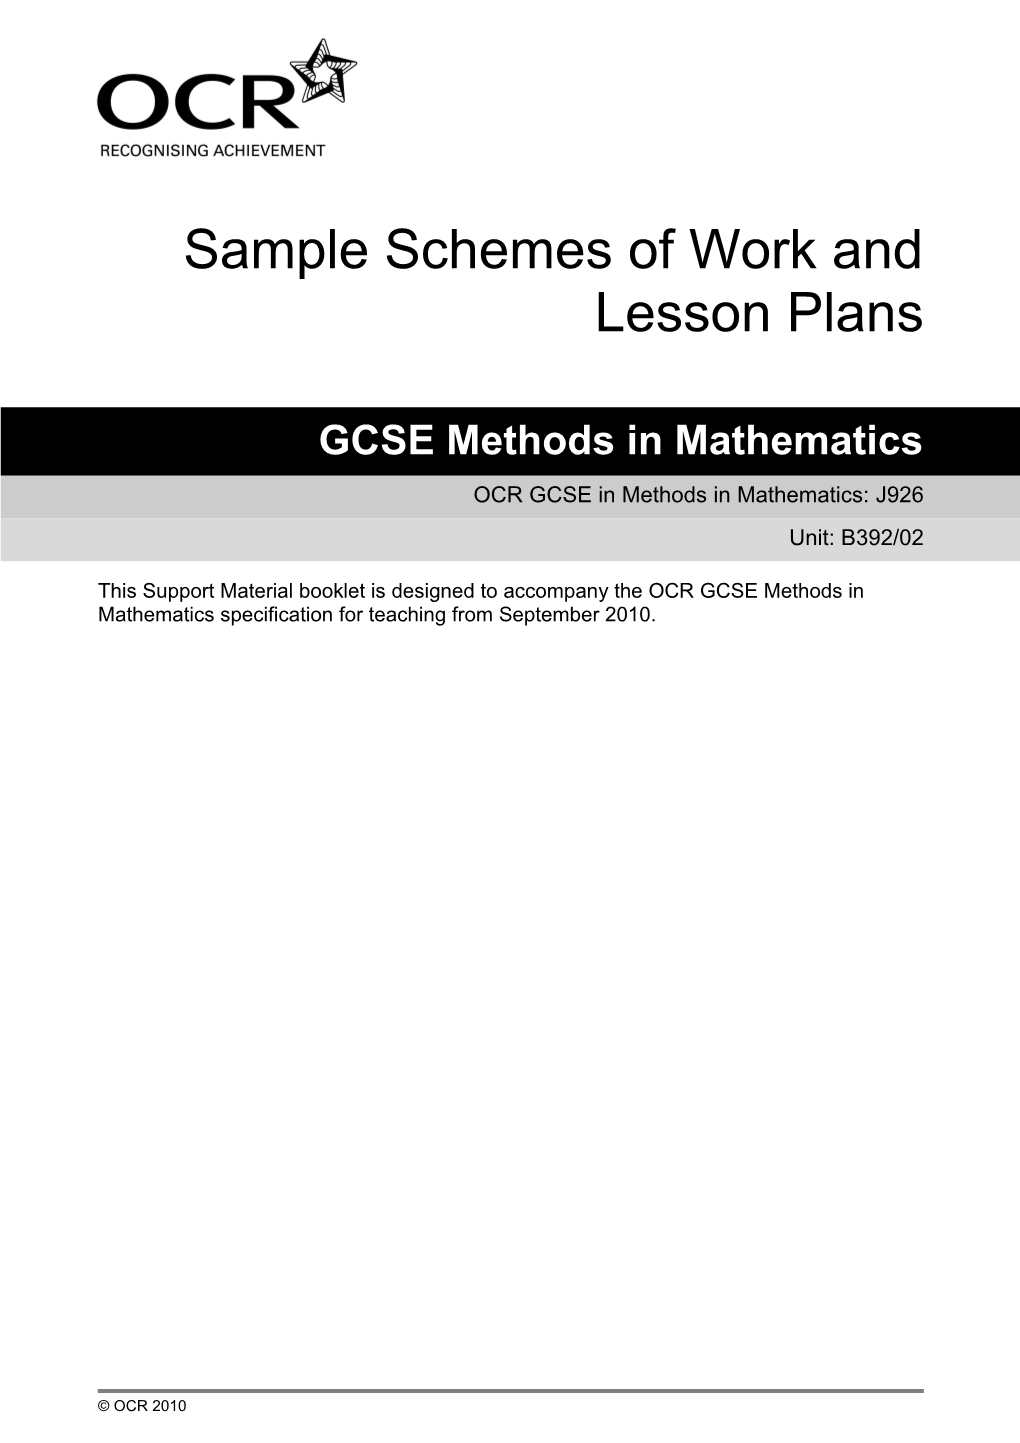 Sample Schemes of Work and Lesson Plans s1